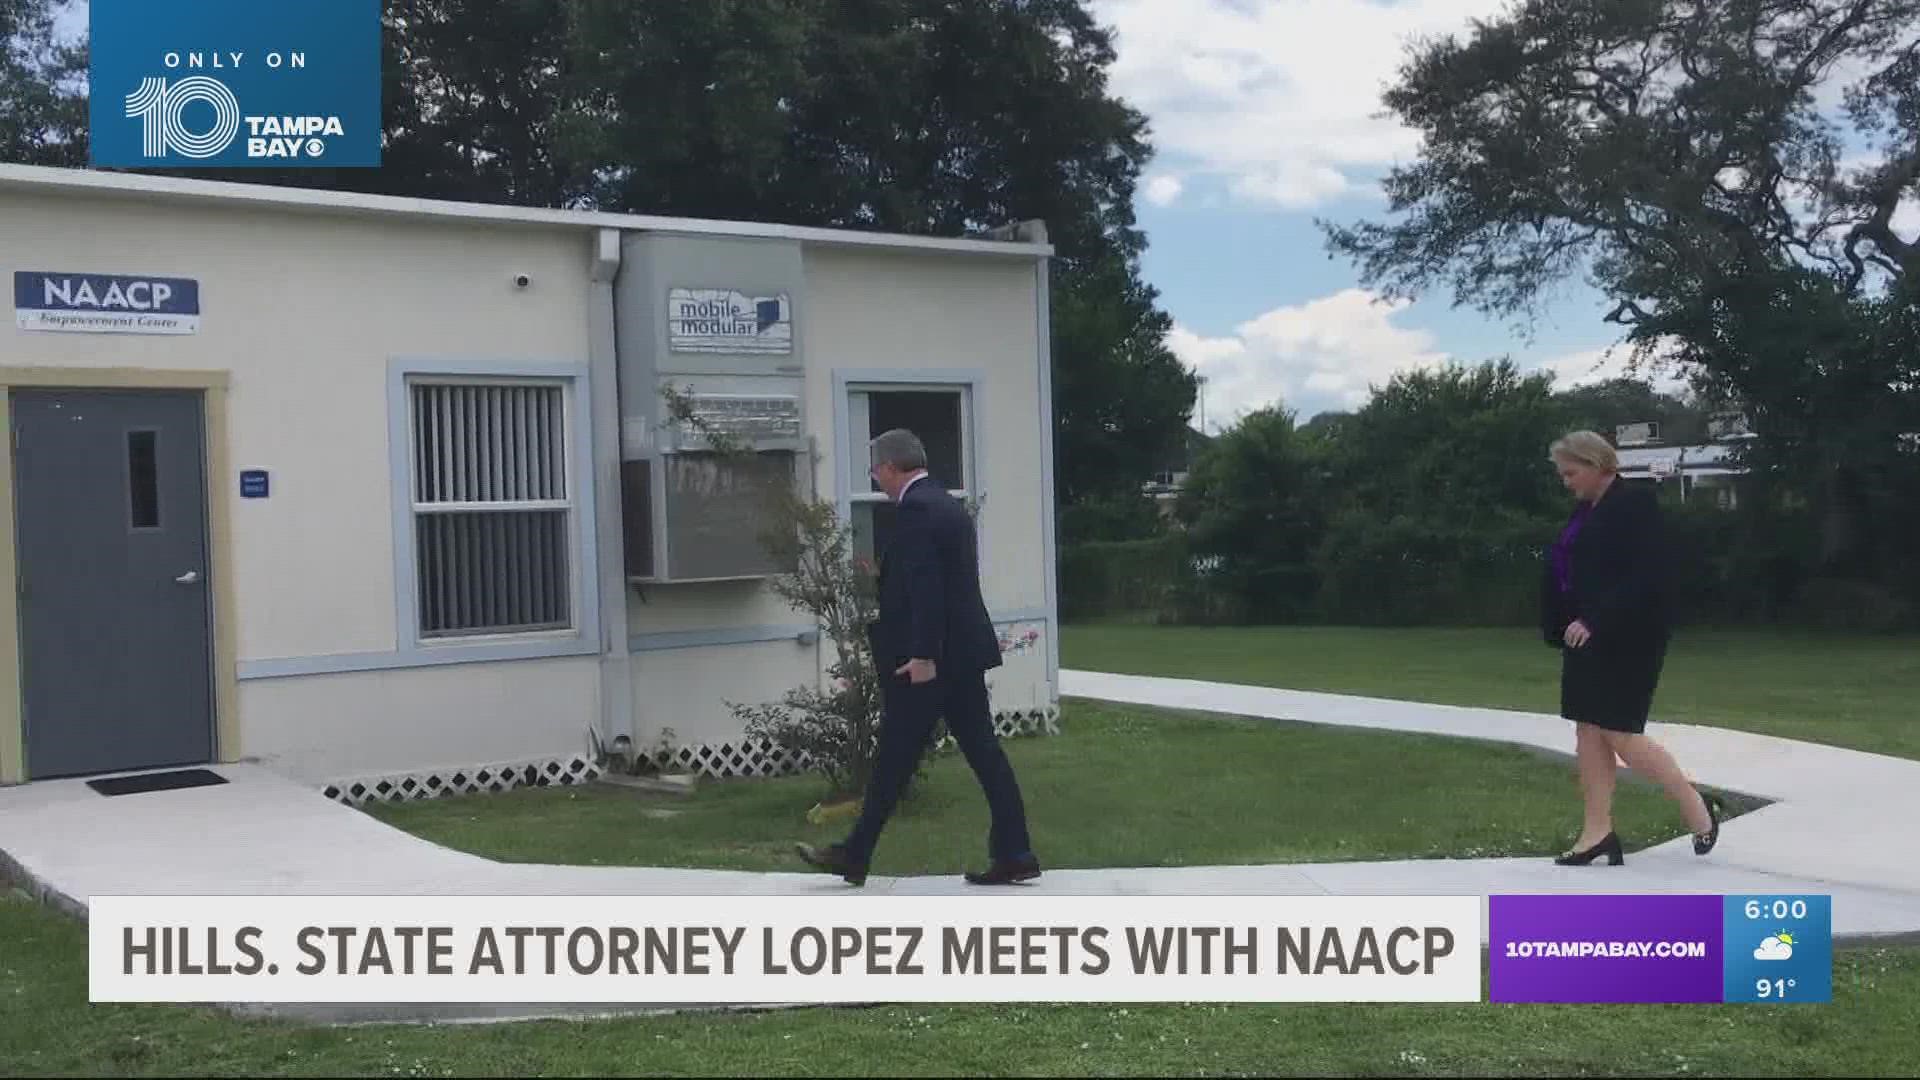 Lopez had no comment as she entered the meeting which came after leaders in the Black community expressed concern over a memo sent by Lopez to her staff.